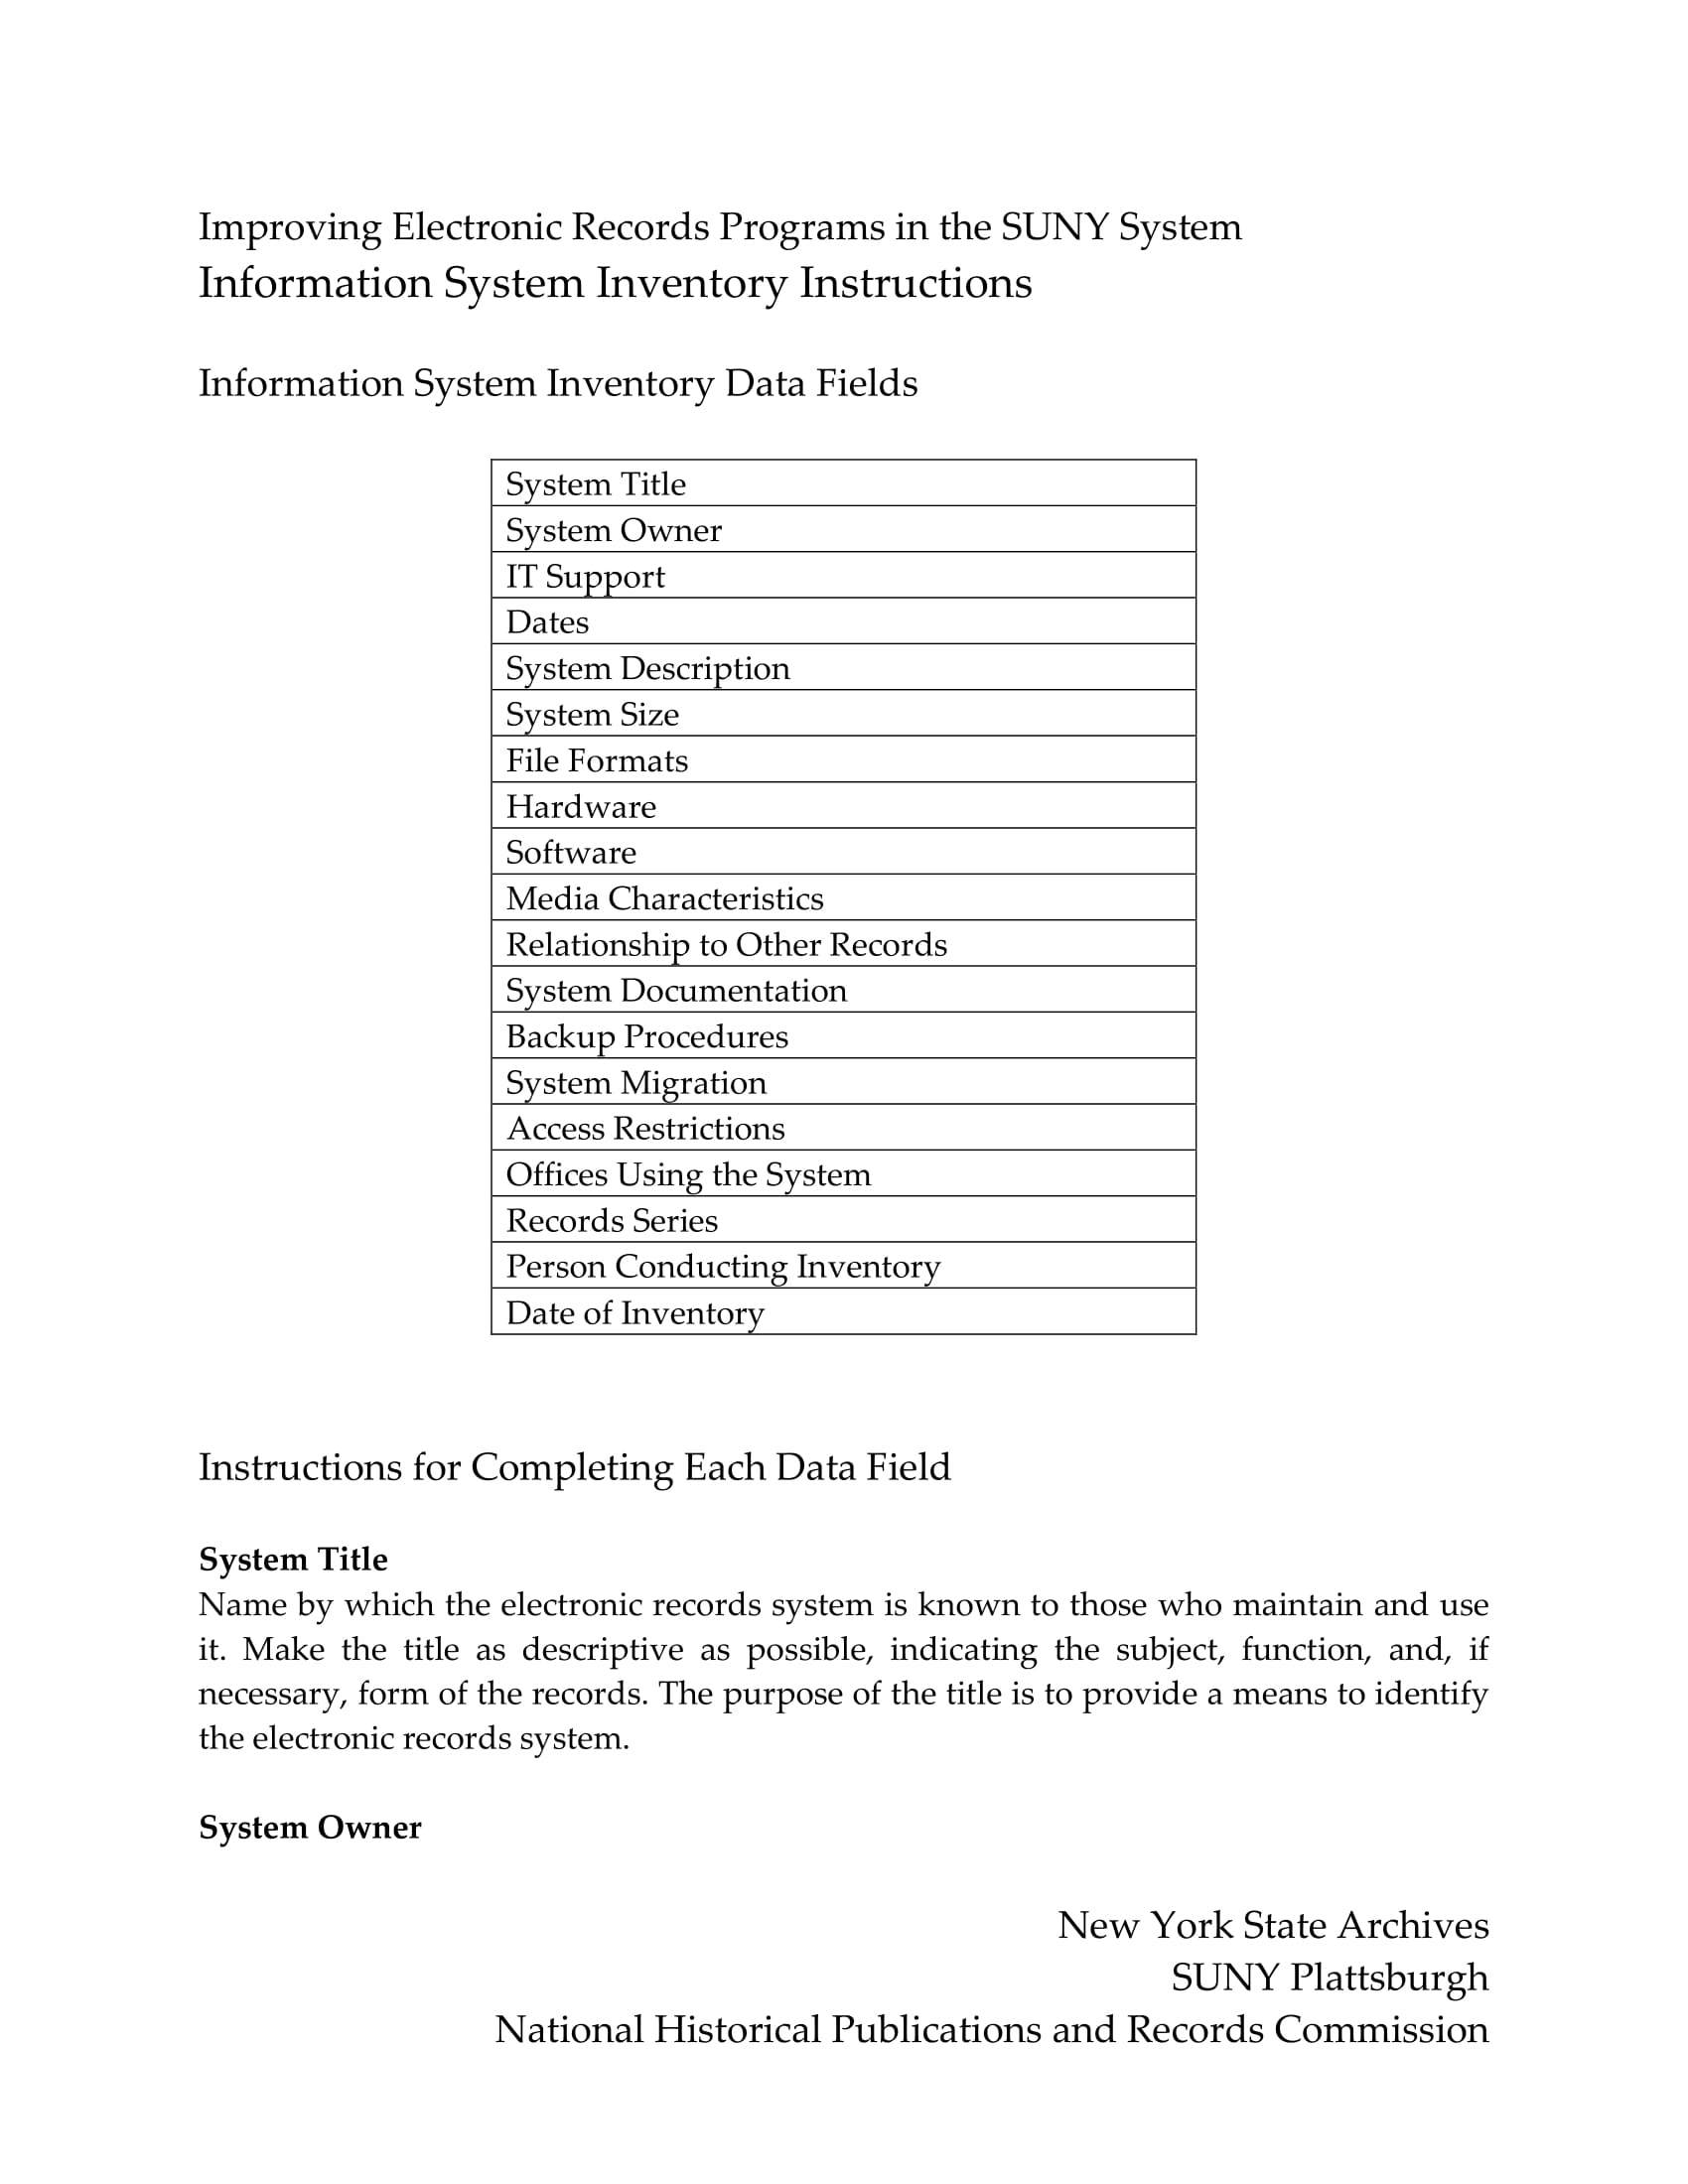 Electronic Record Programs Information Systems Inventory Database Example 1